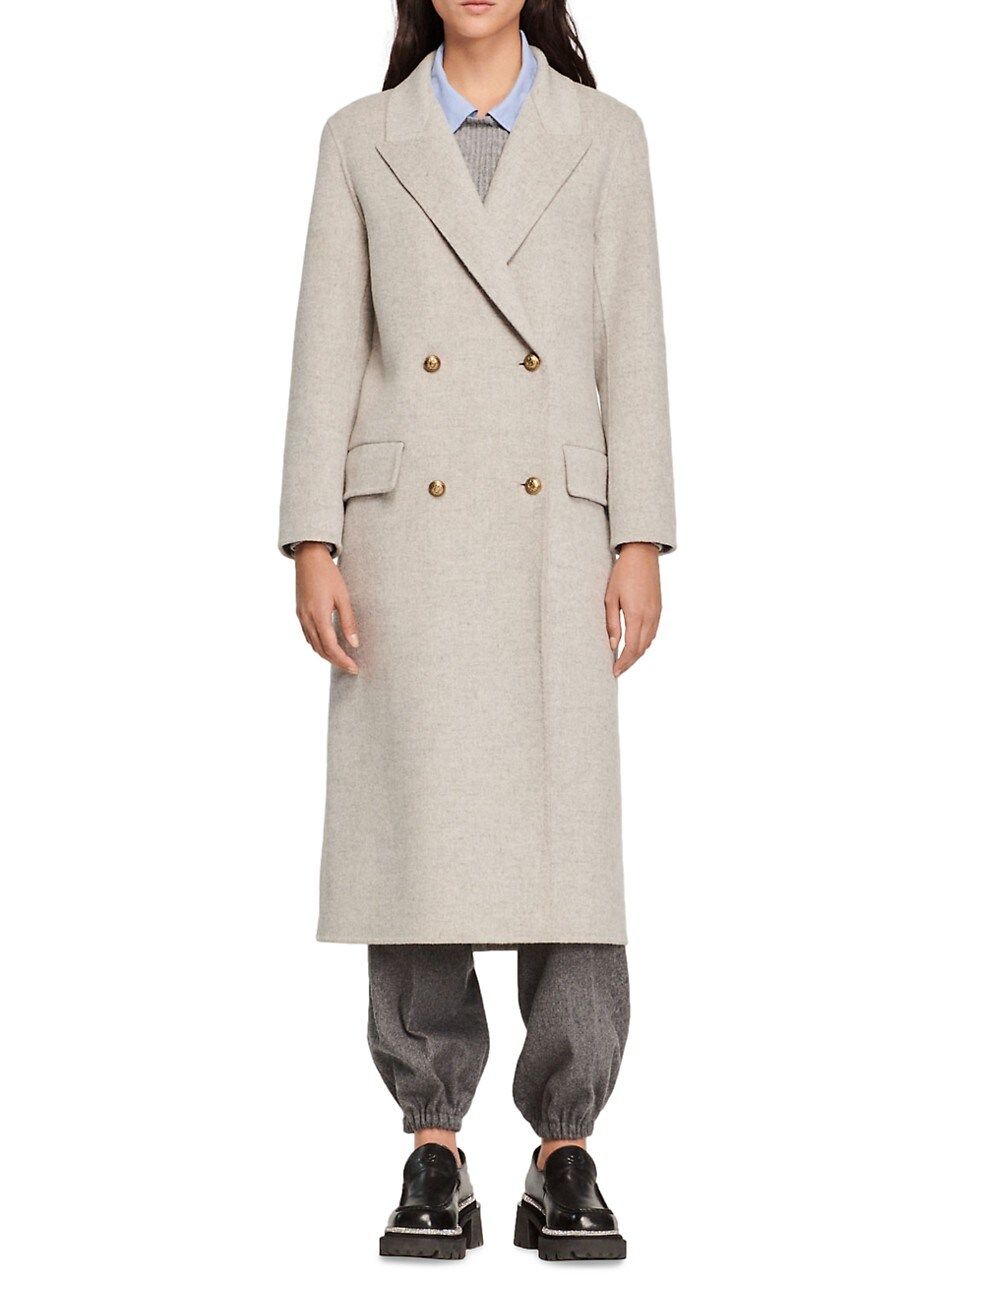 Mystere Double-Breasted Wool Coat | Saks Fifth Avenue